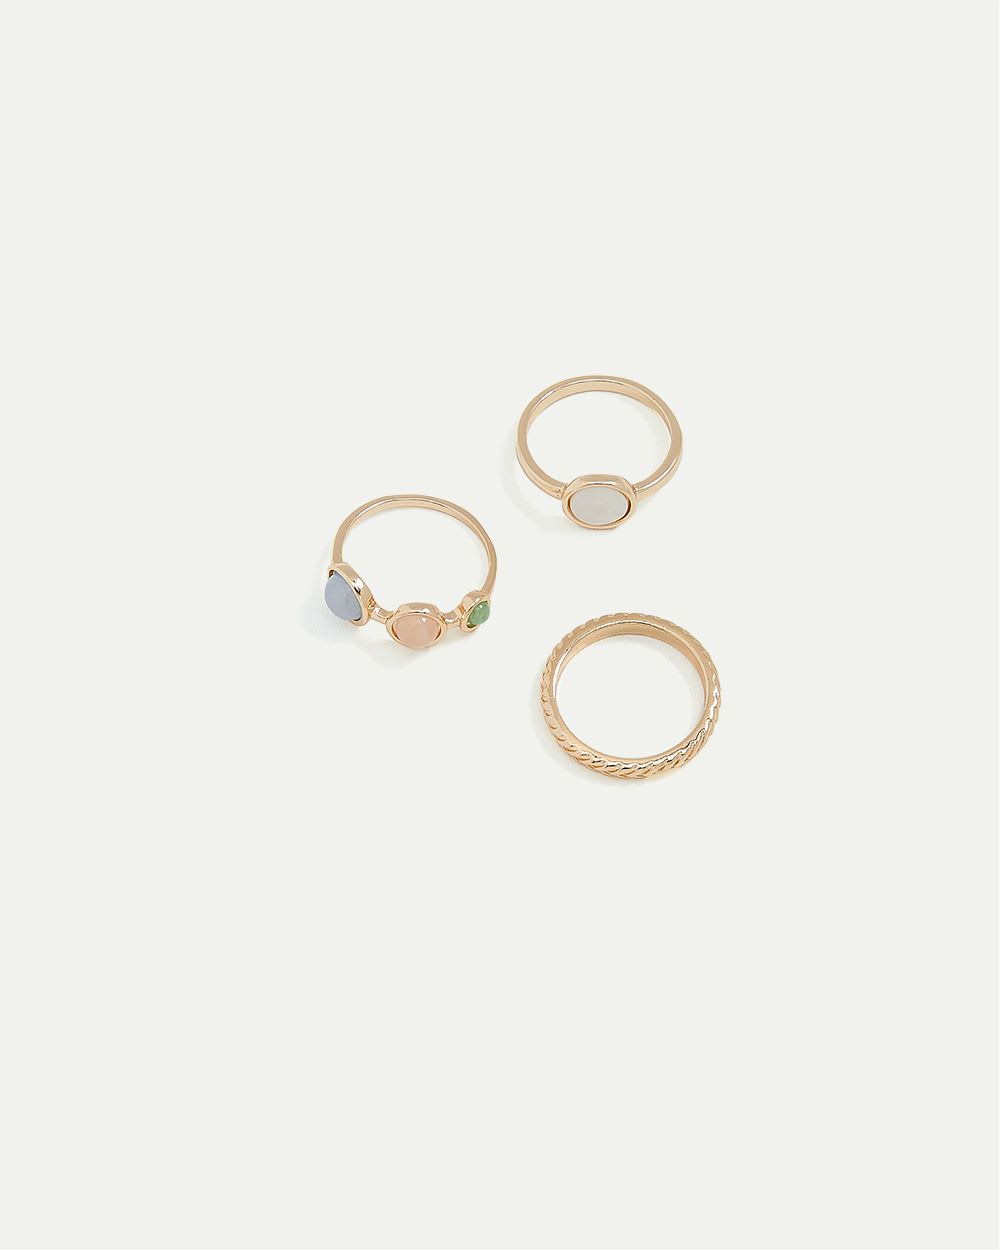 Rings with Pastel Stones and Pearl - Set of 3